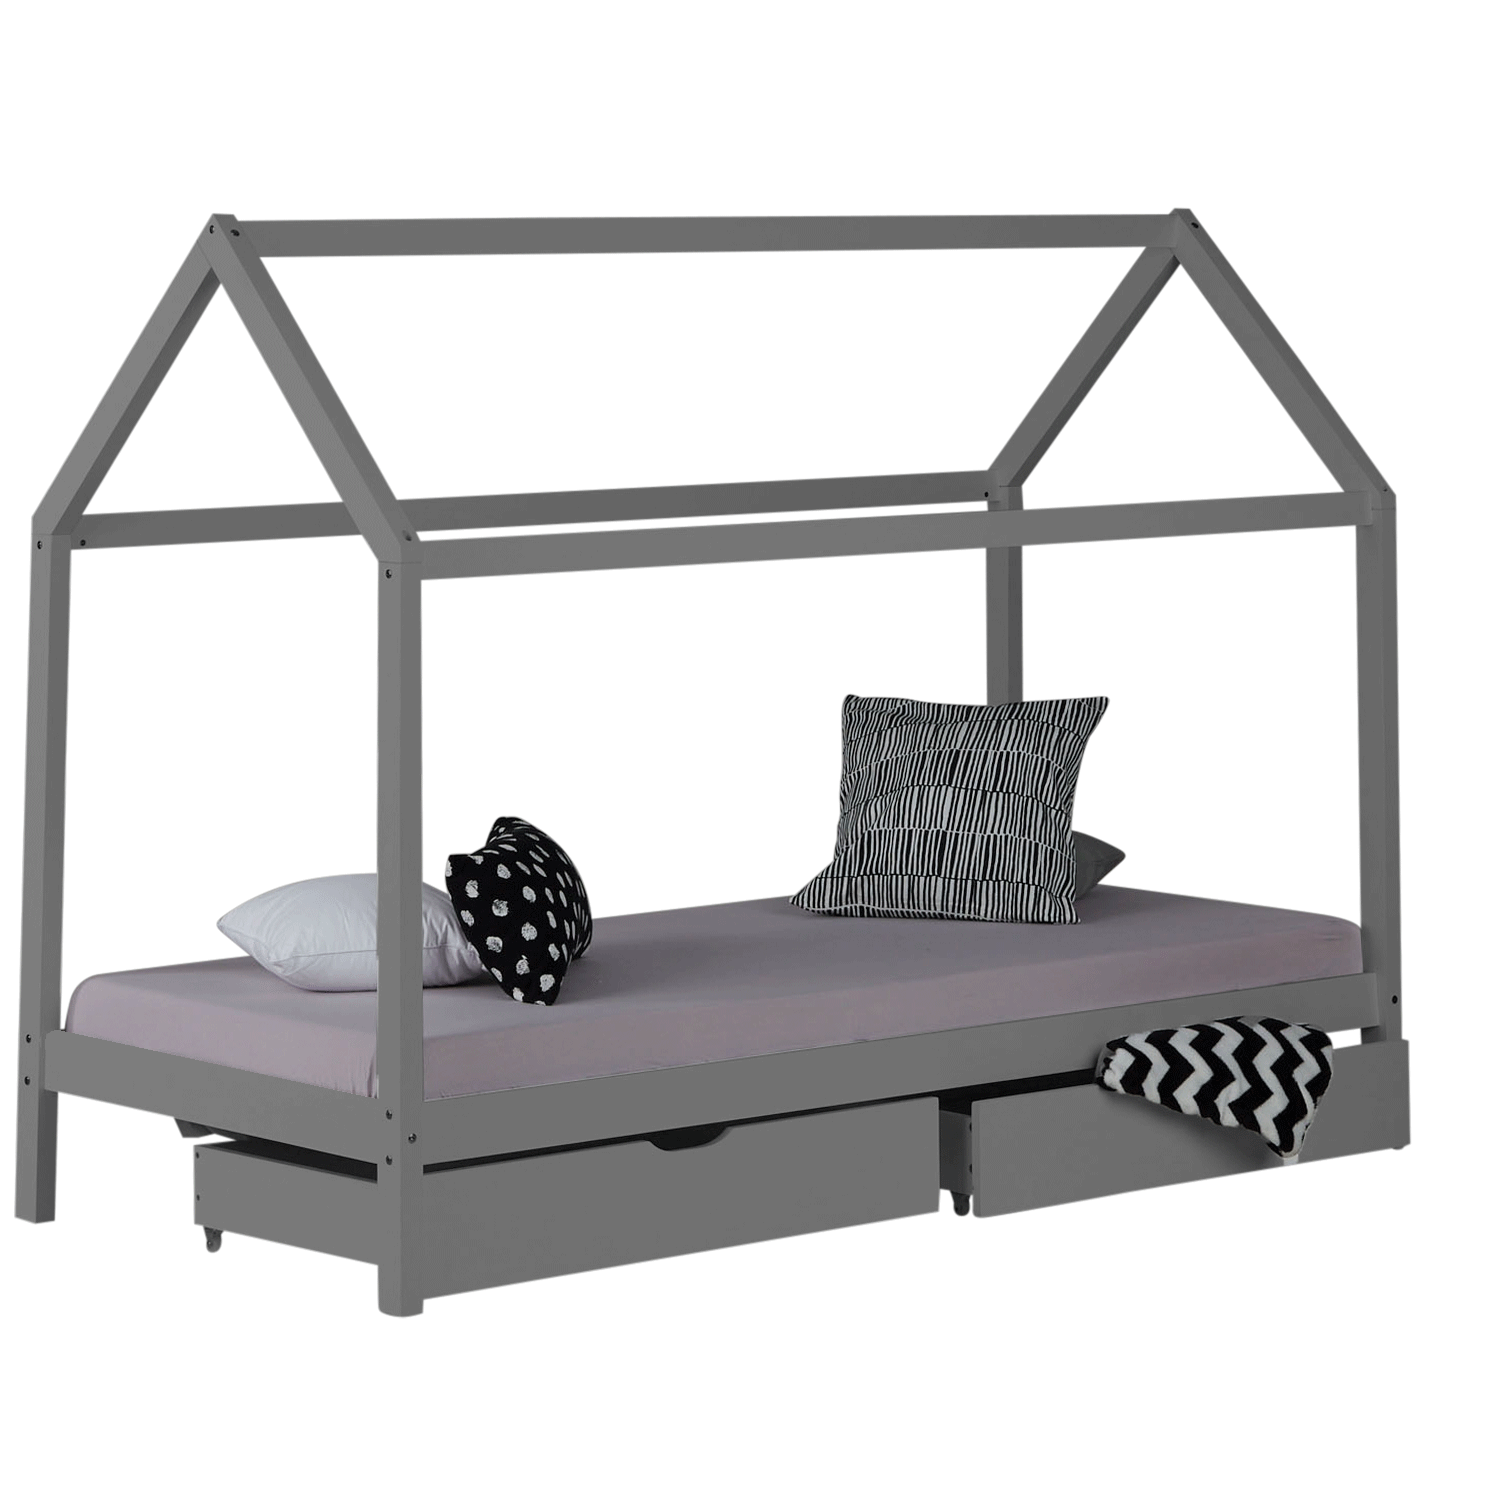 Childrens Bed House Bed Frame For Kids 90x200 cm Grey With Drawers